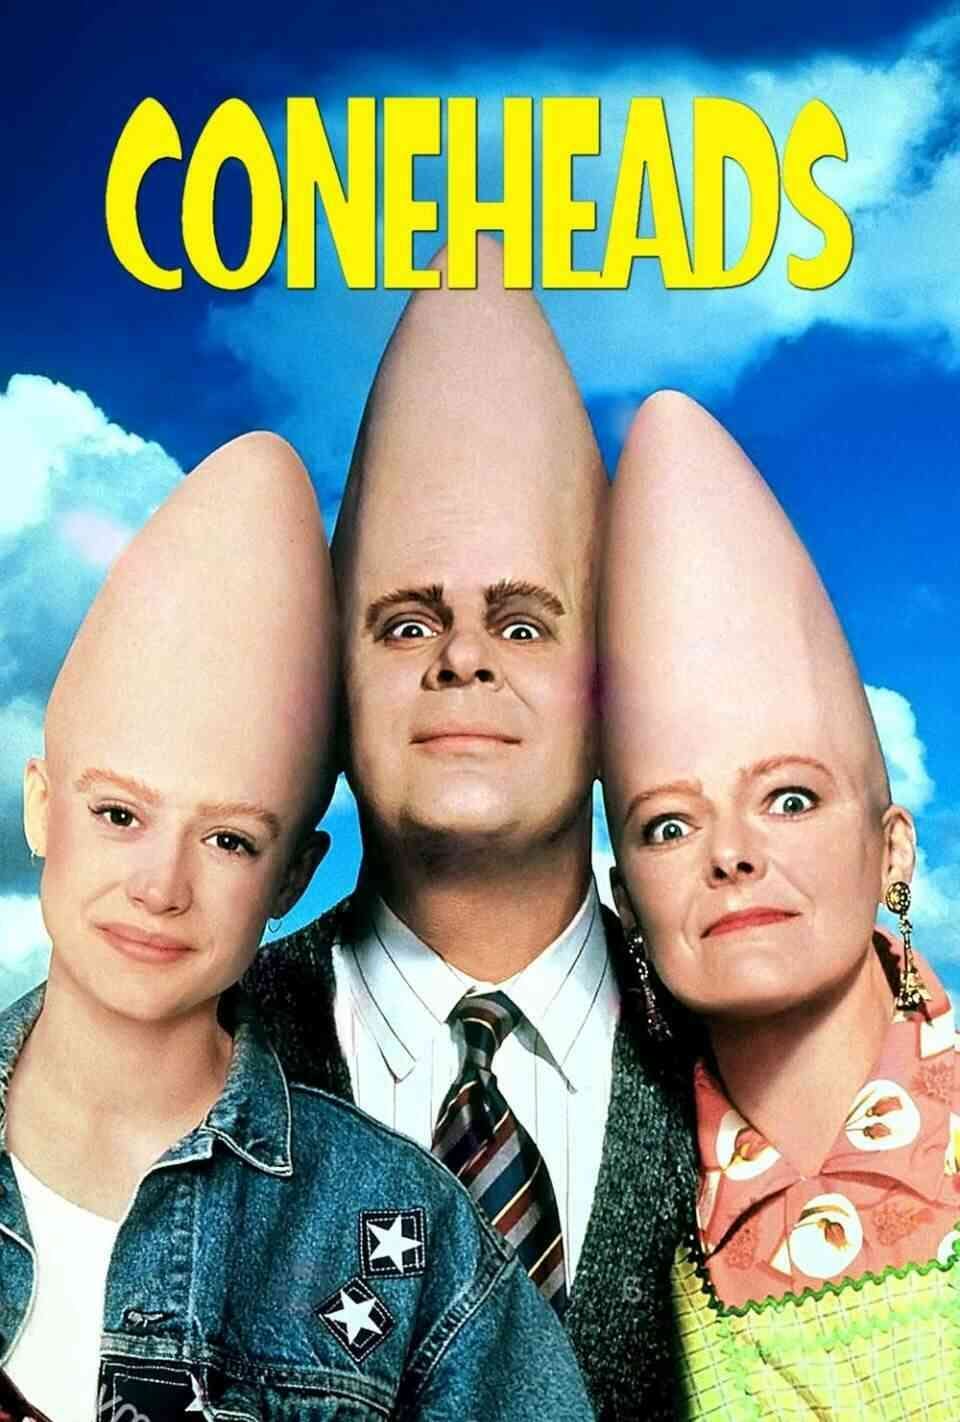 Read Coneheads screenplay (poster)